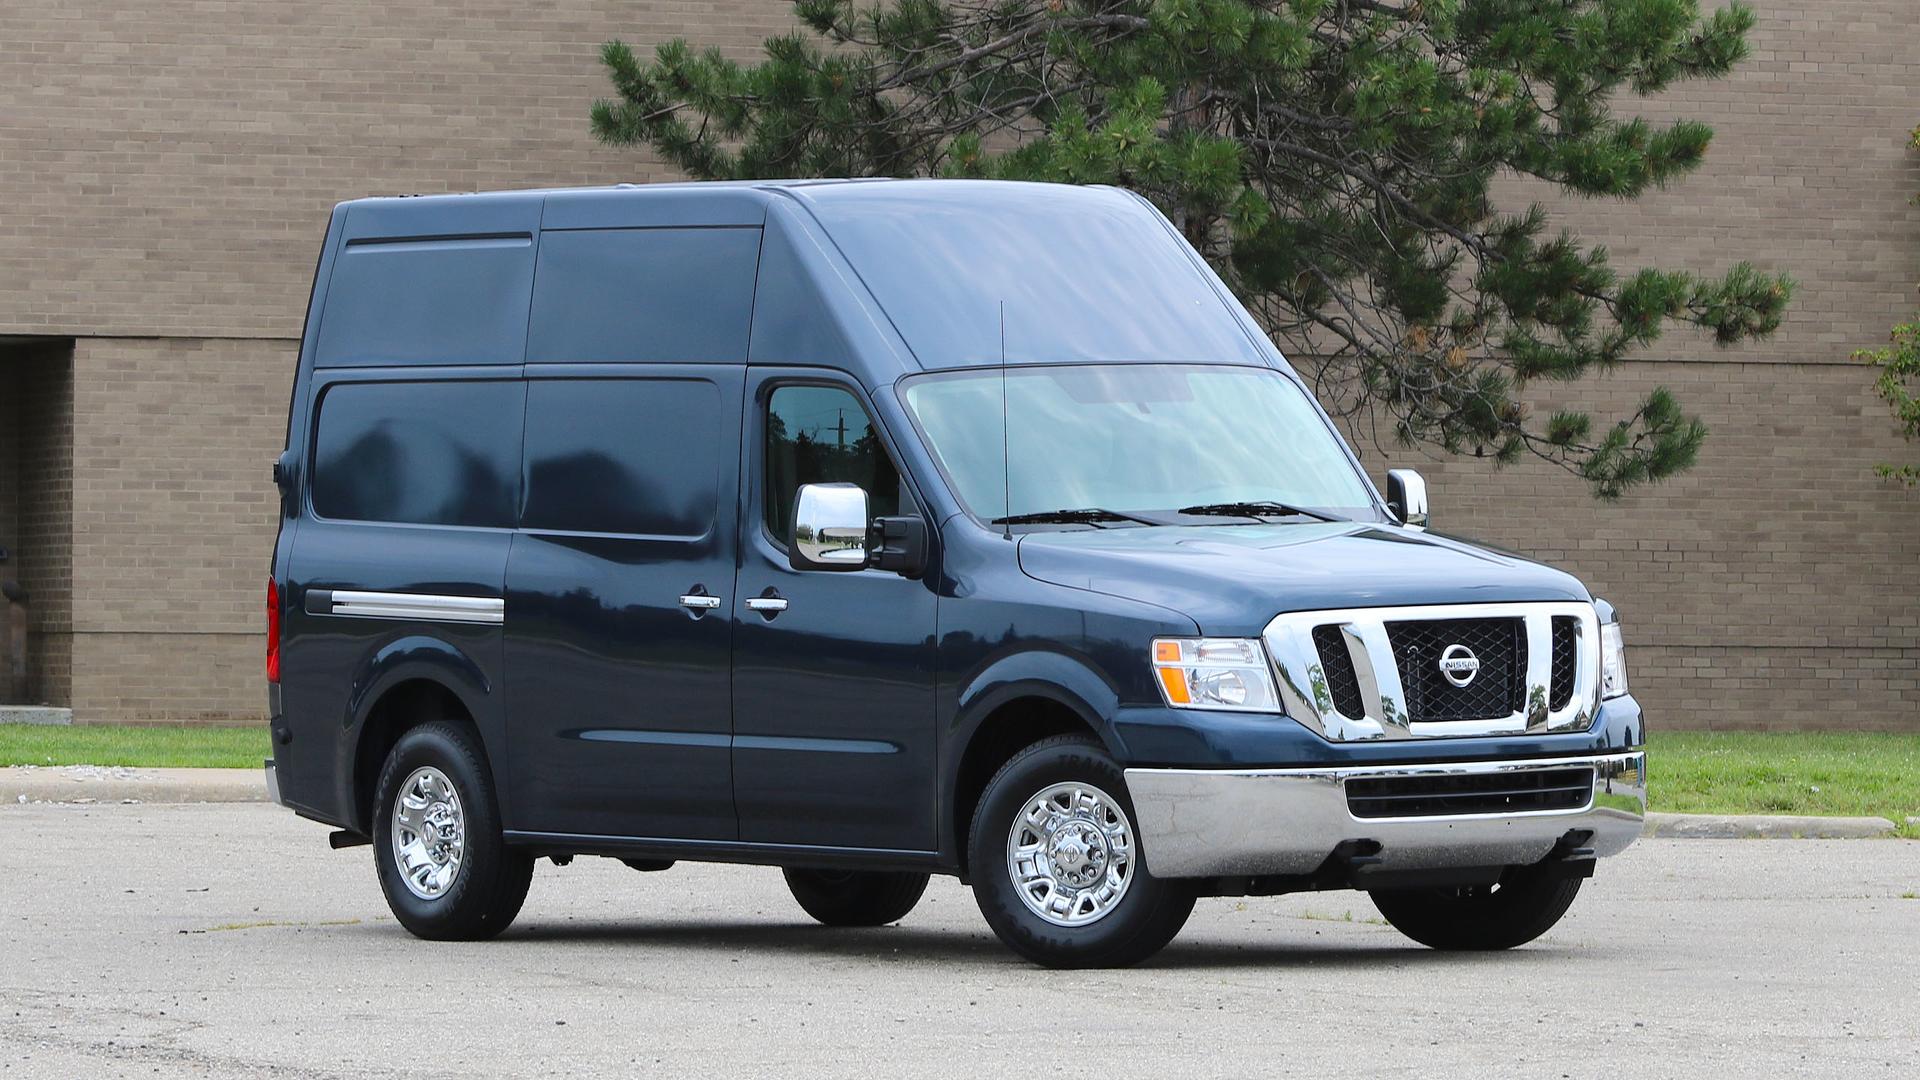 2017 Nissan NV3500 Review: Be The Envy Of The Moving Company